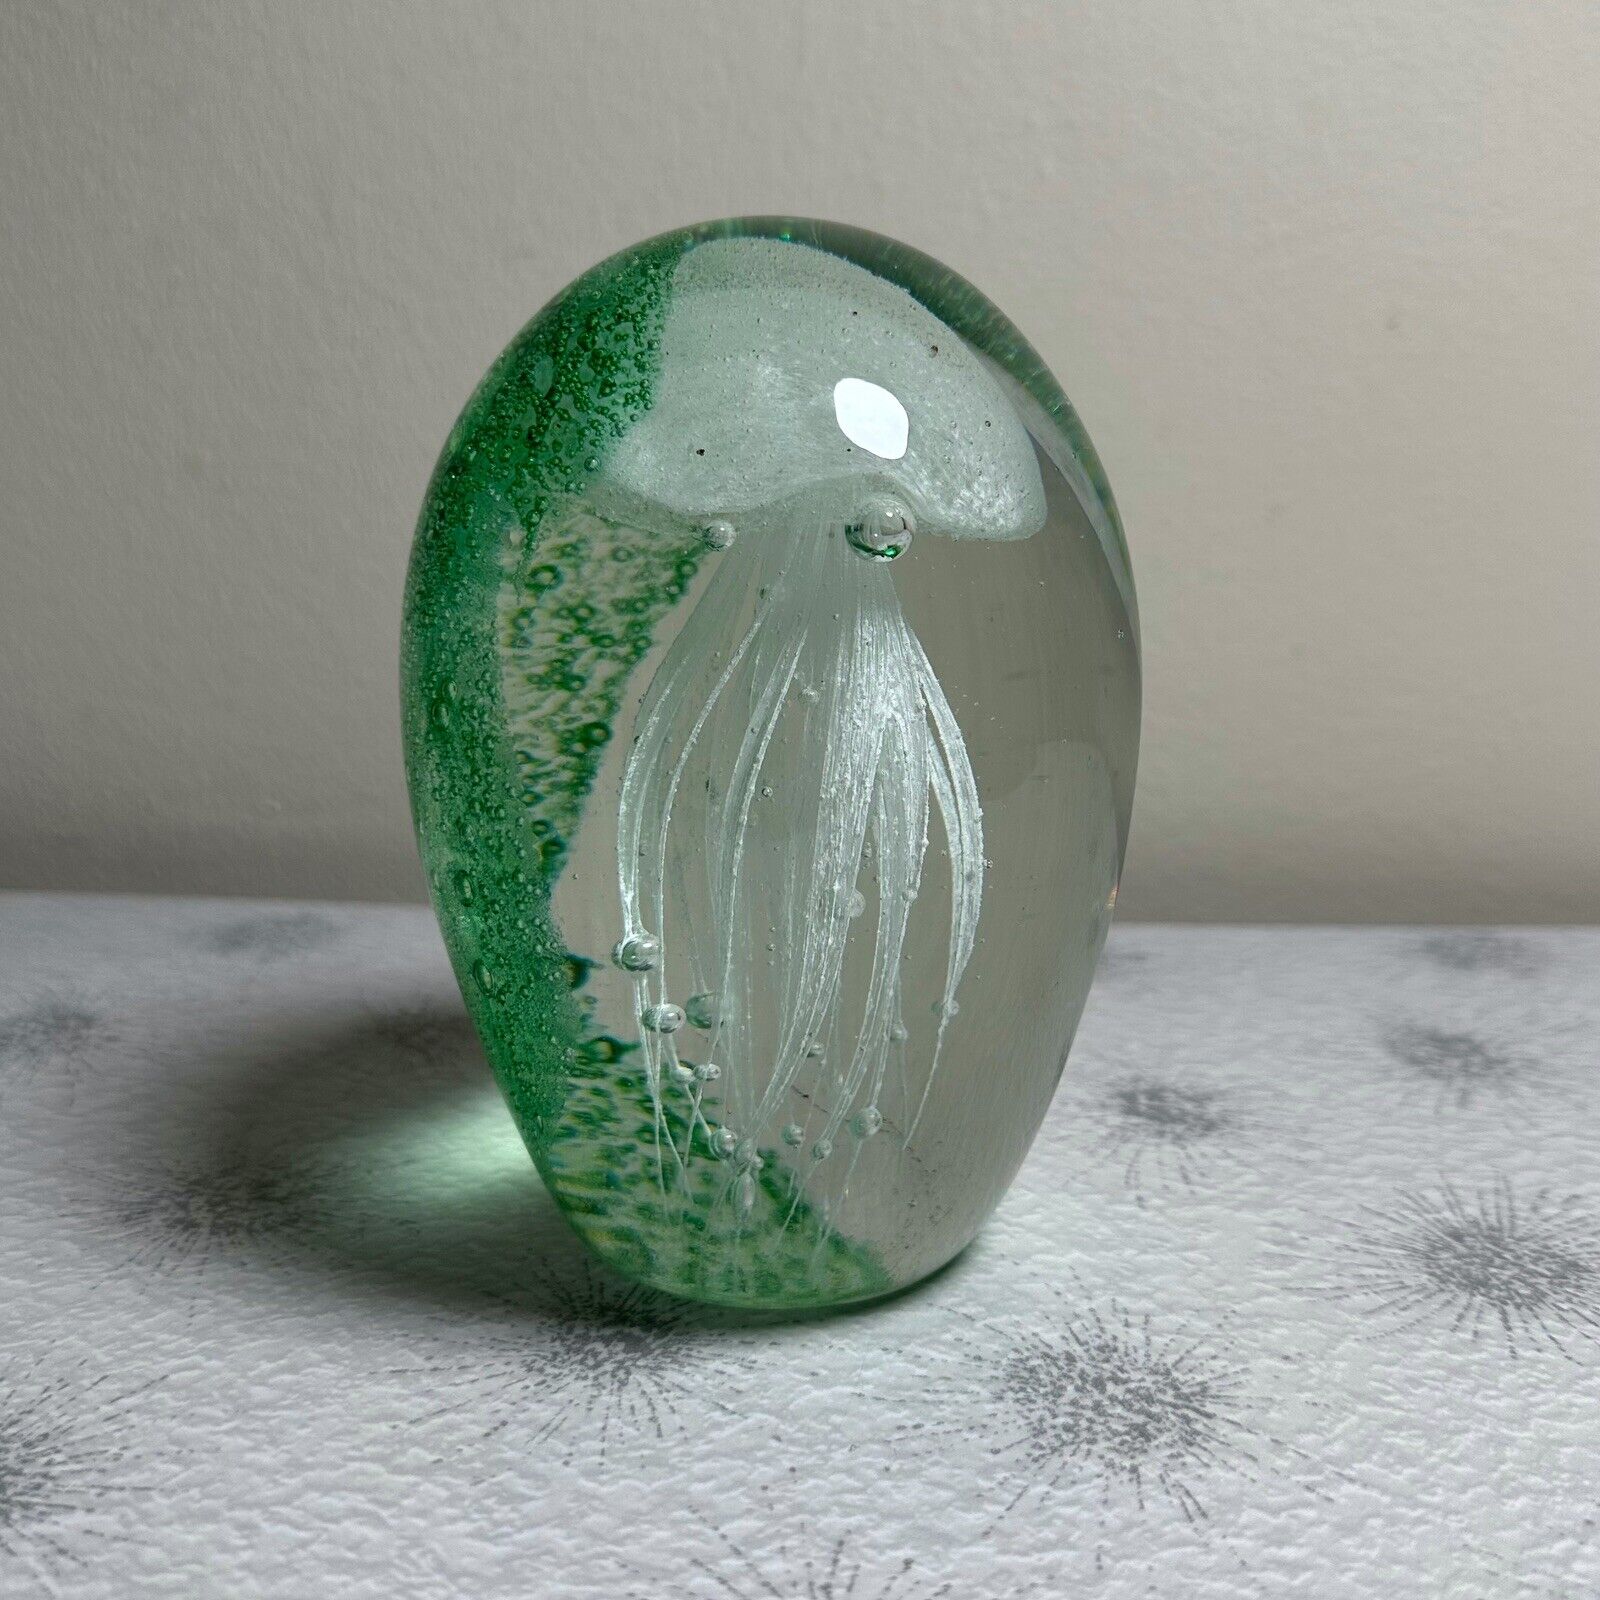 EUC 5 Inch Jellyfish Paperweight Underwater Ocean Sea Life Bubbles Green White